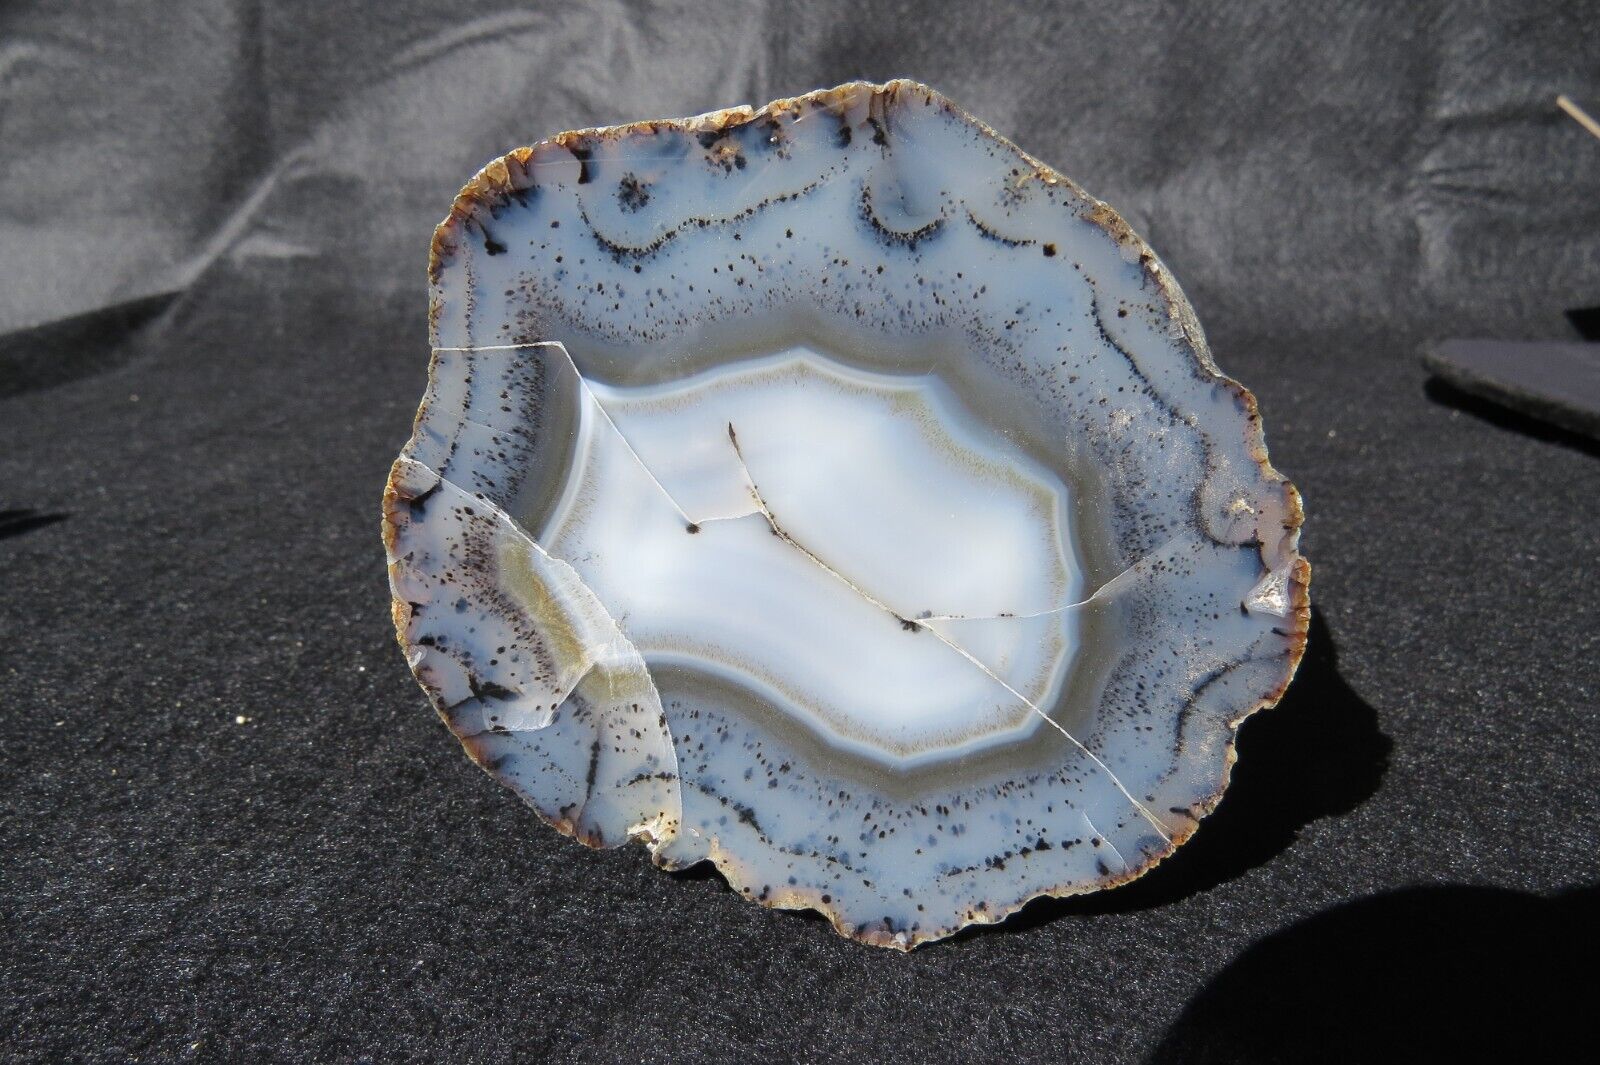 AN OUT STANDING MONTANA AGATE COLLECTOR PIECE FROM A PRIVATE COLLECTION.